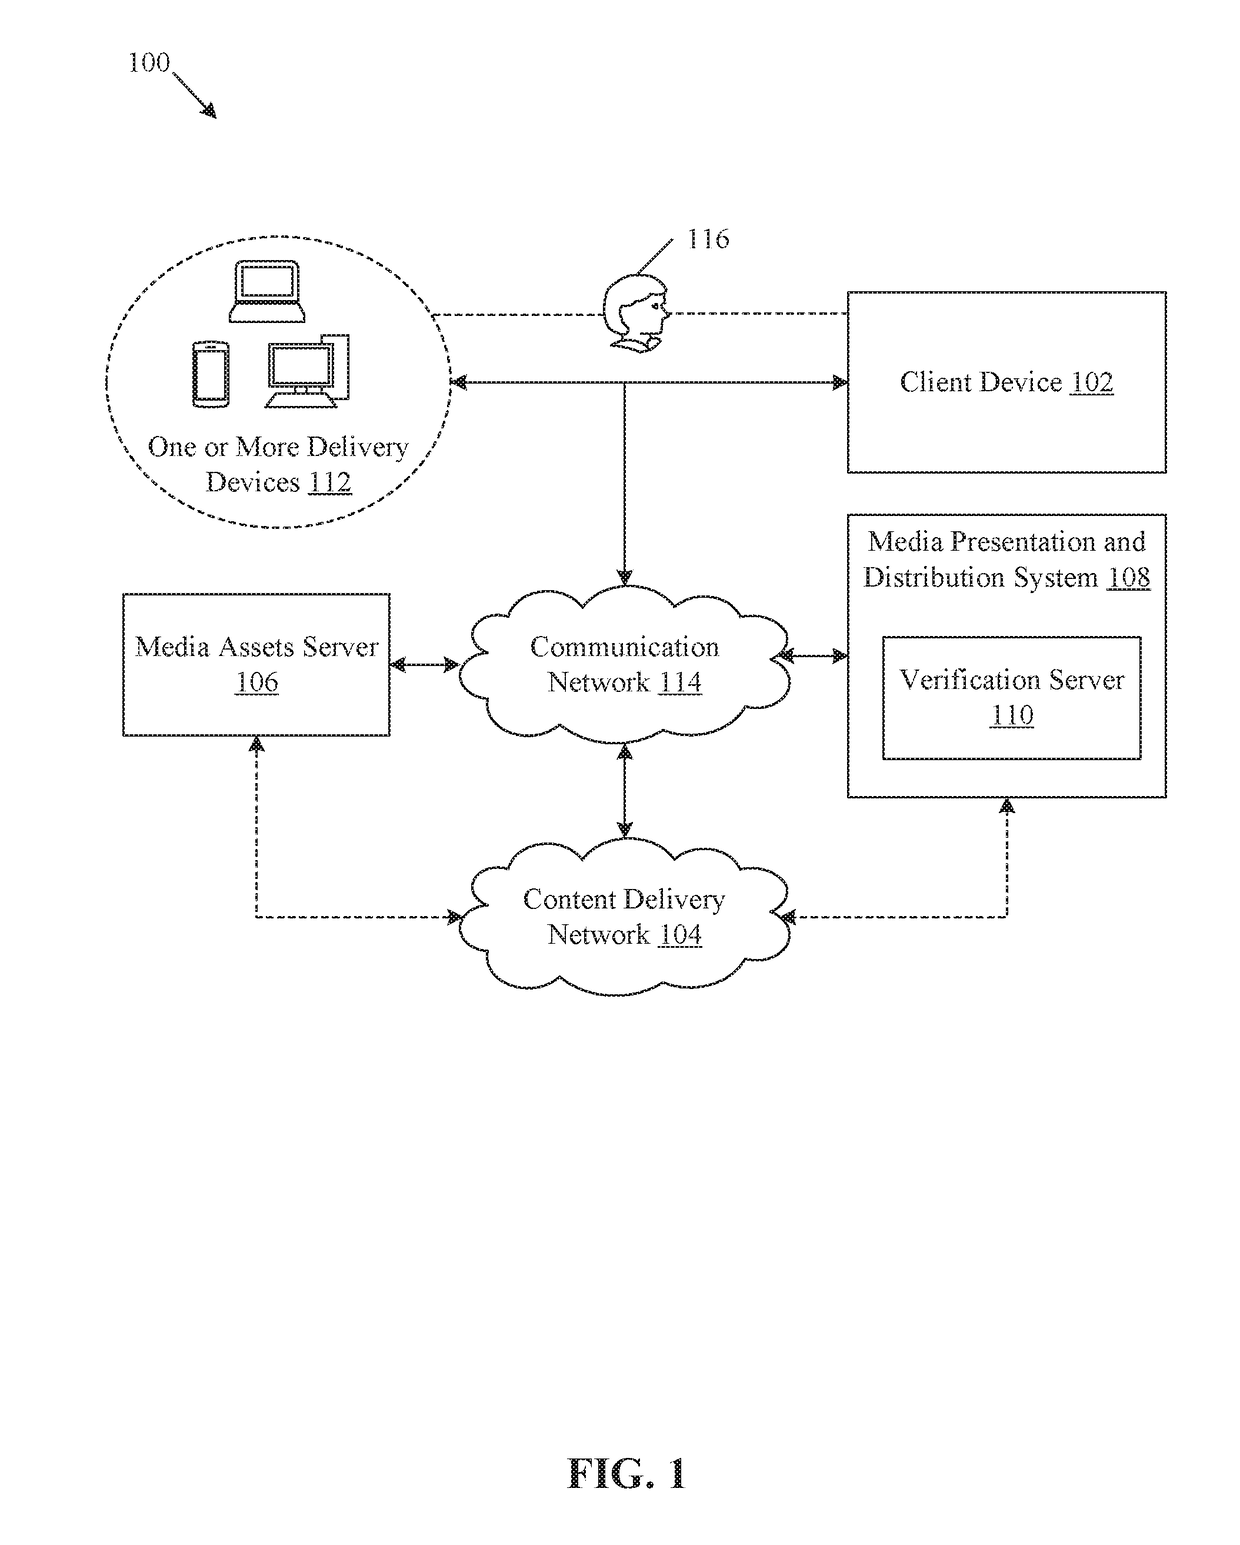 Dynamic verification of playback of media assets at client device